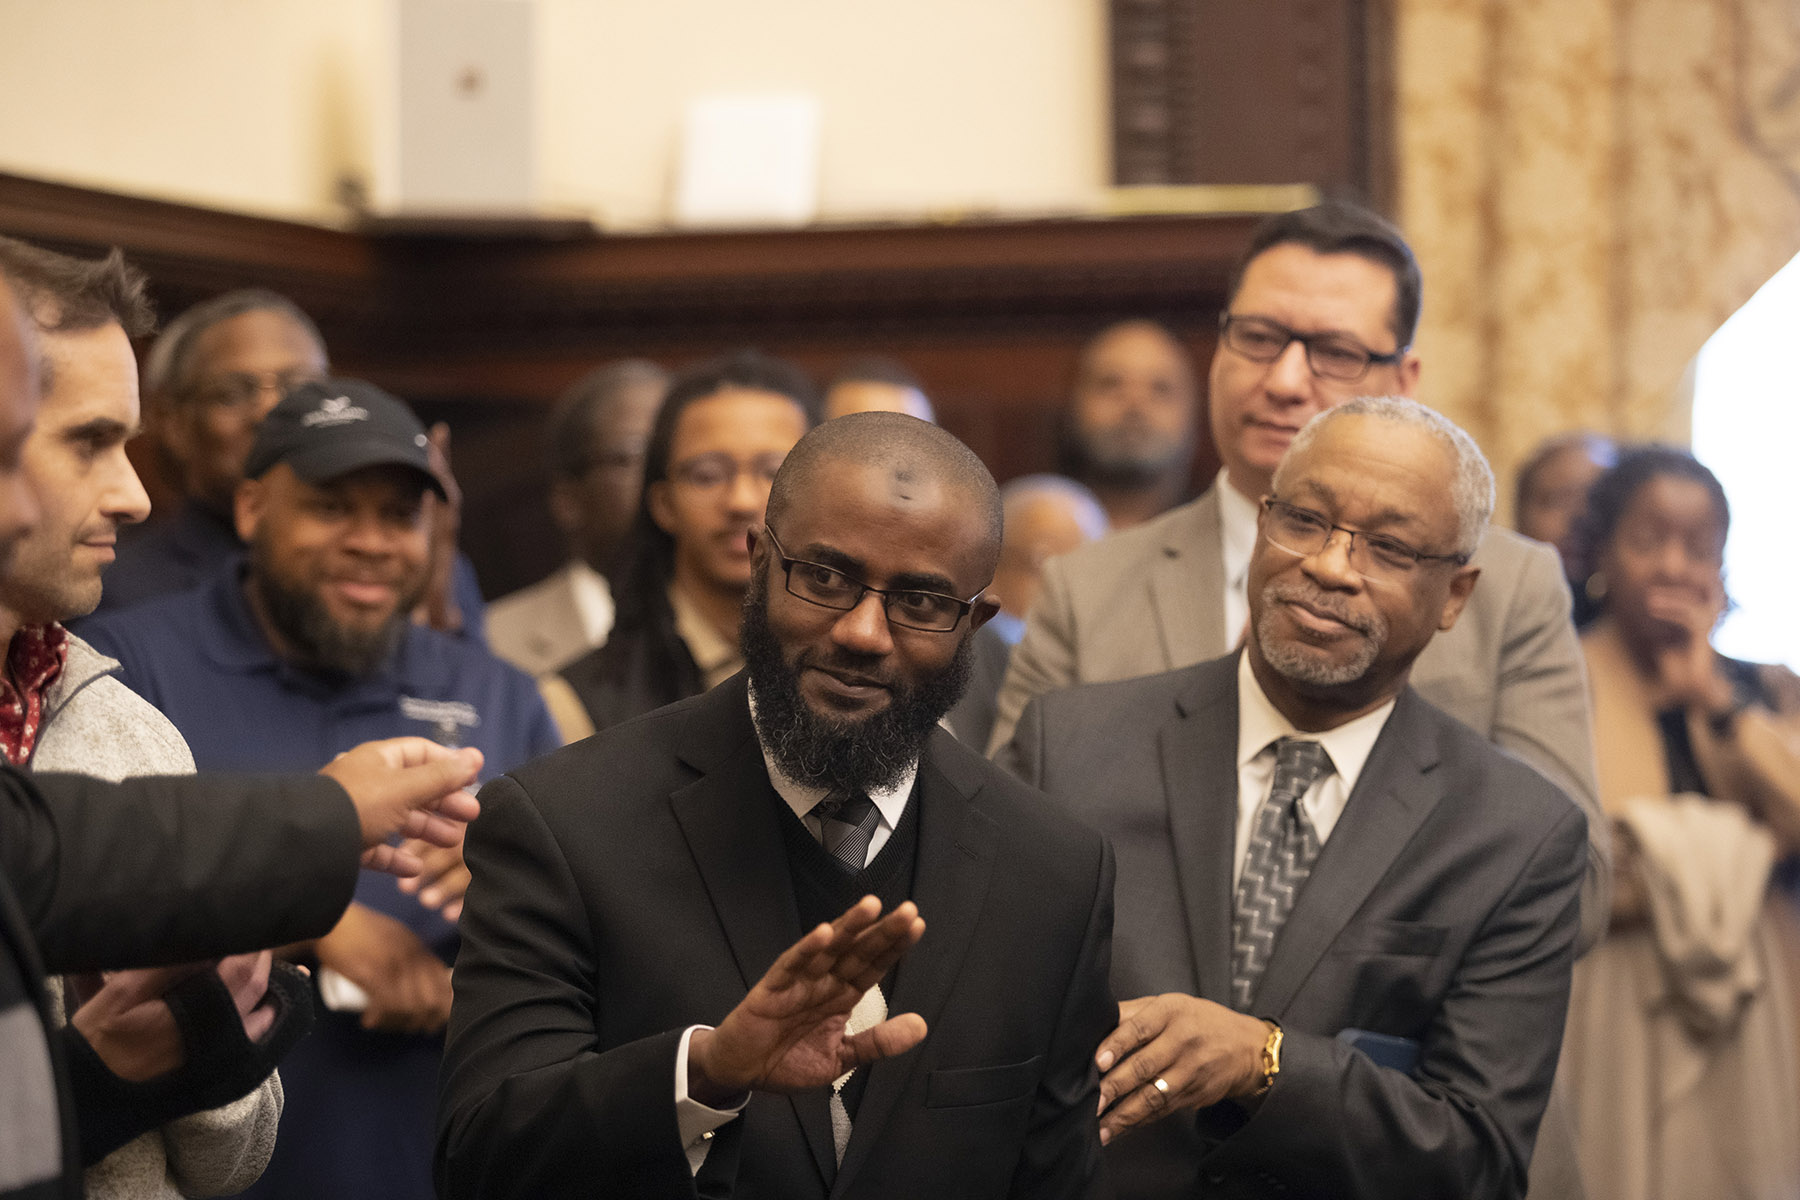 Temple faculty member Quaiser D. Abdullah interacts with Bishop Wilfred H. Speakes Sr. during a news conference held at City Hall. Abdullah will work closely with Speakes in his role as the city's director of Muslim engagement.